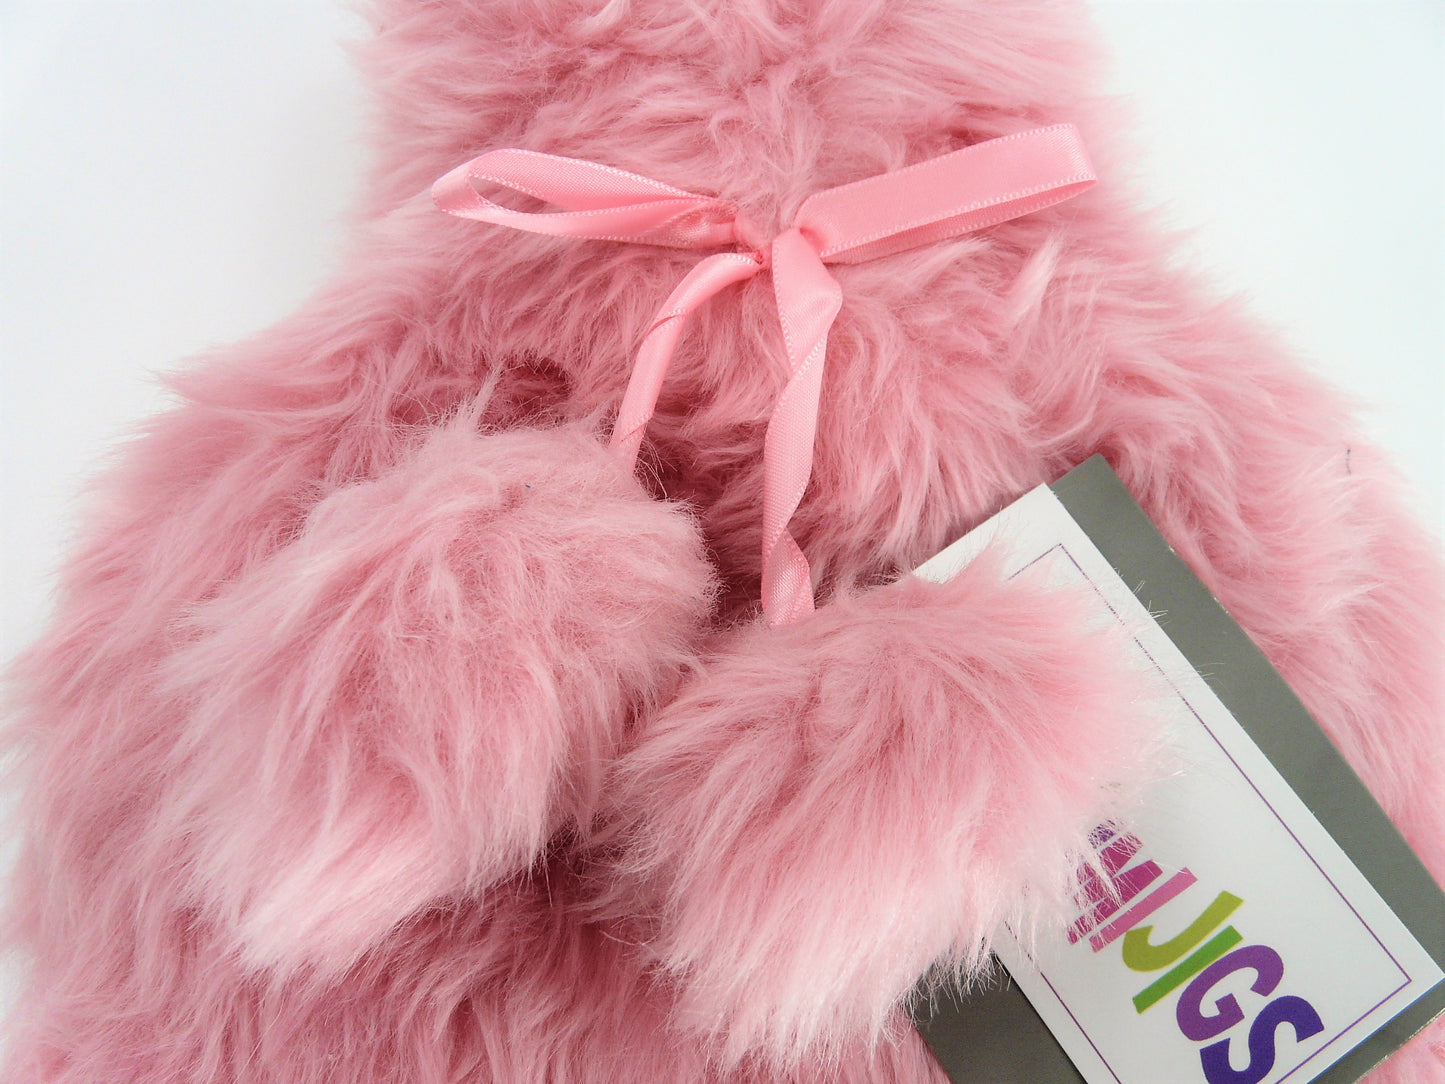 Slumberzzz Lush Plush with Pom Pom Hot Water Bottle 2 Litre Pink